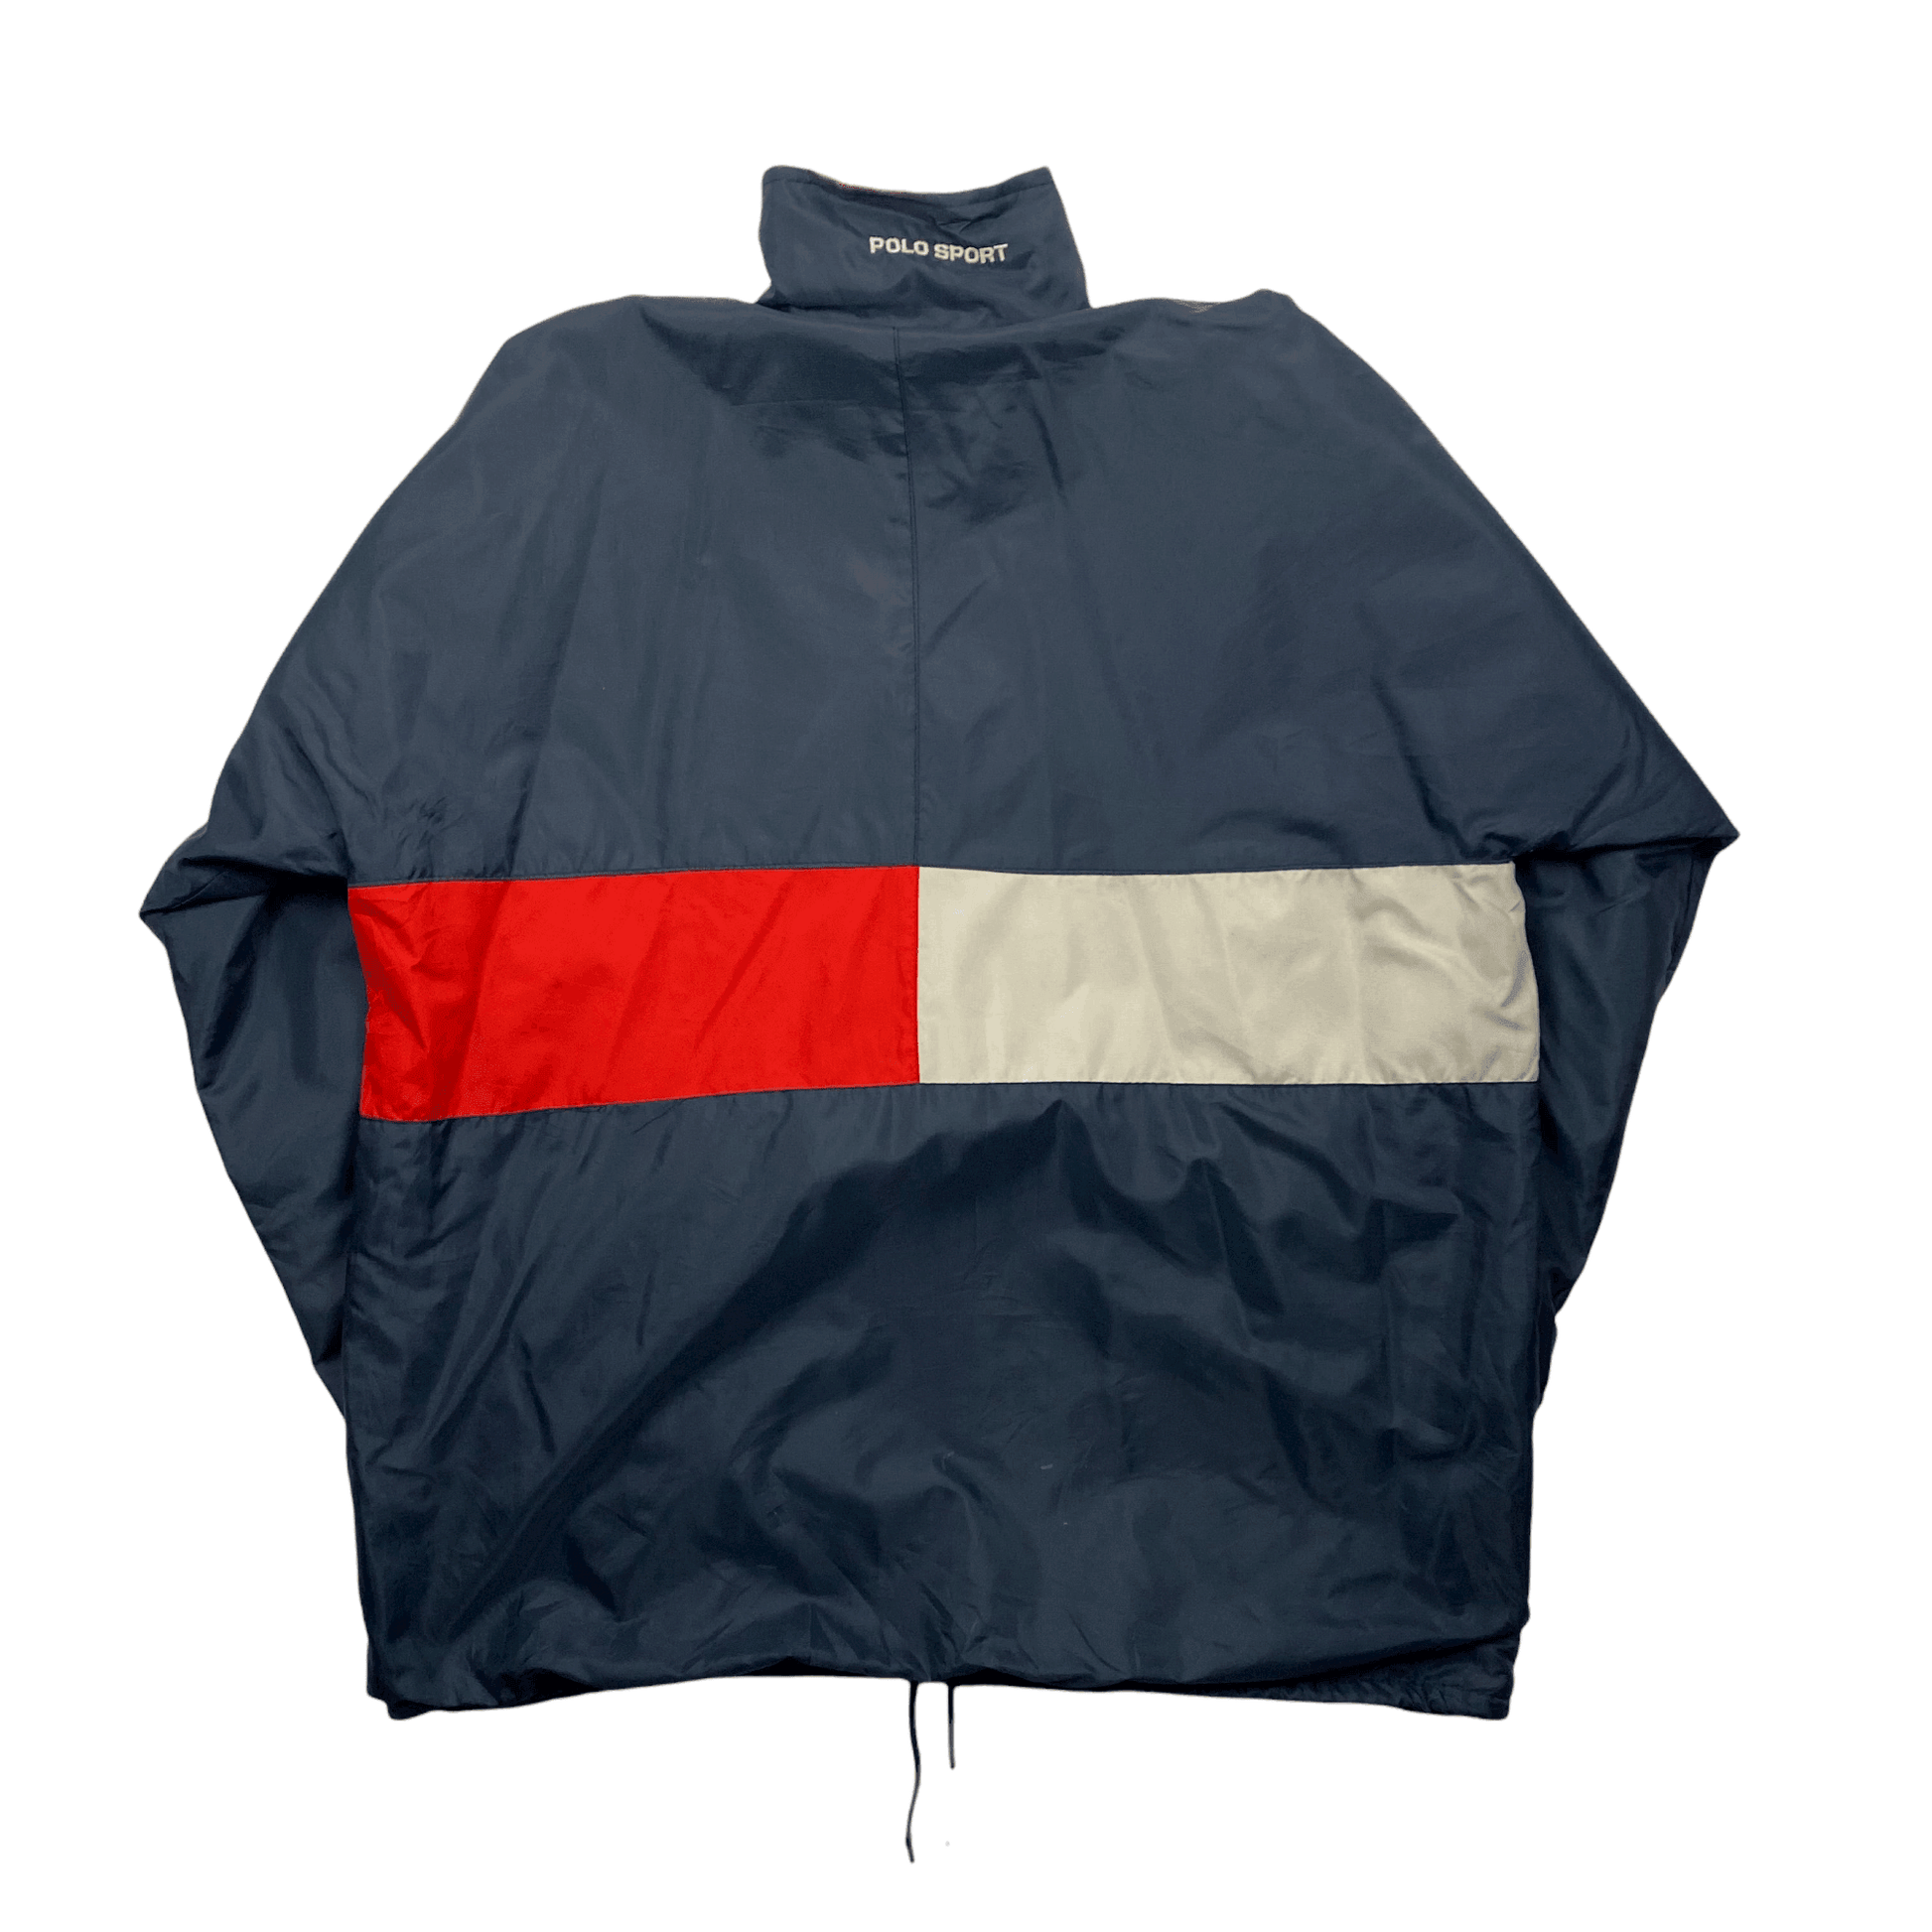 Vintage 80s Navy Blue, White + Red Ralph Lauren Polo Sport Large Logo Spell-Out Jacket - The Streetwear Studio